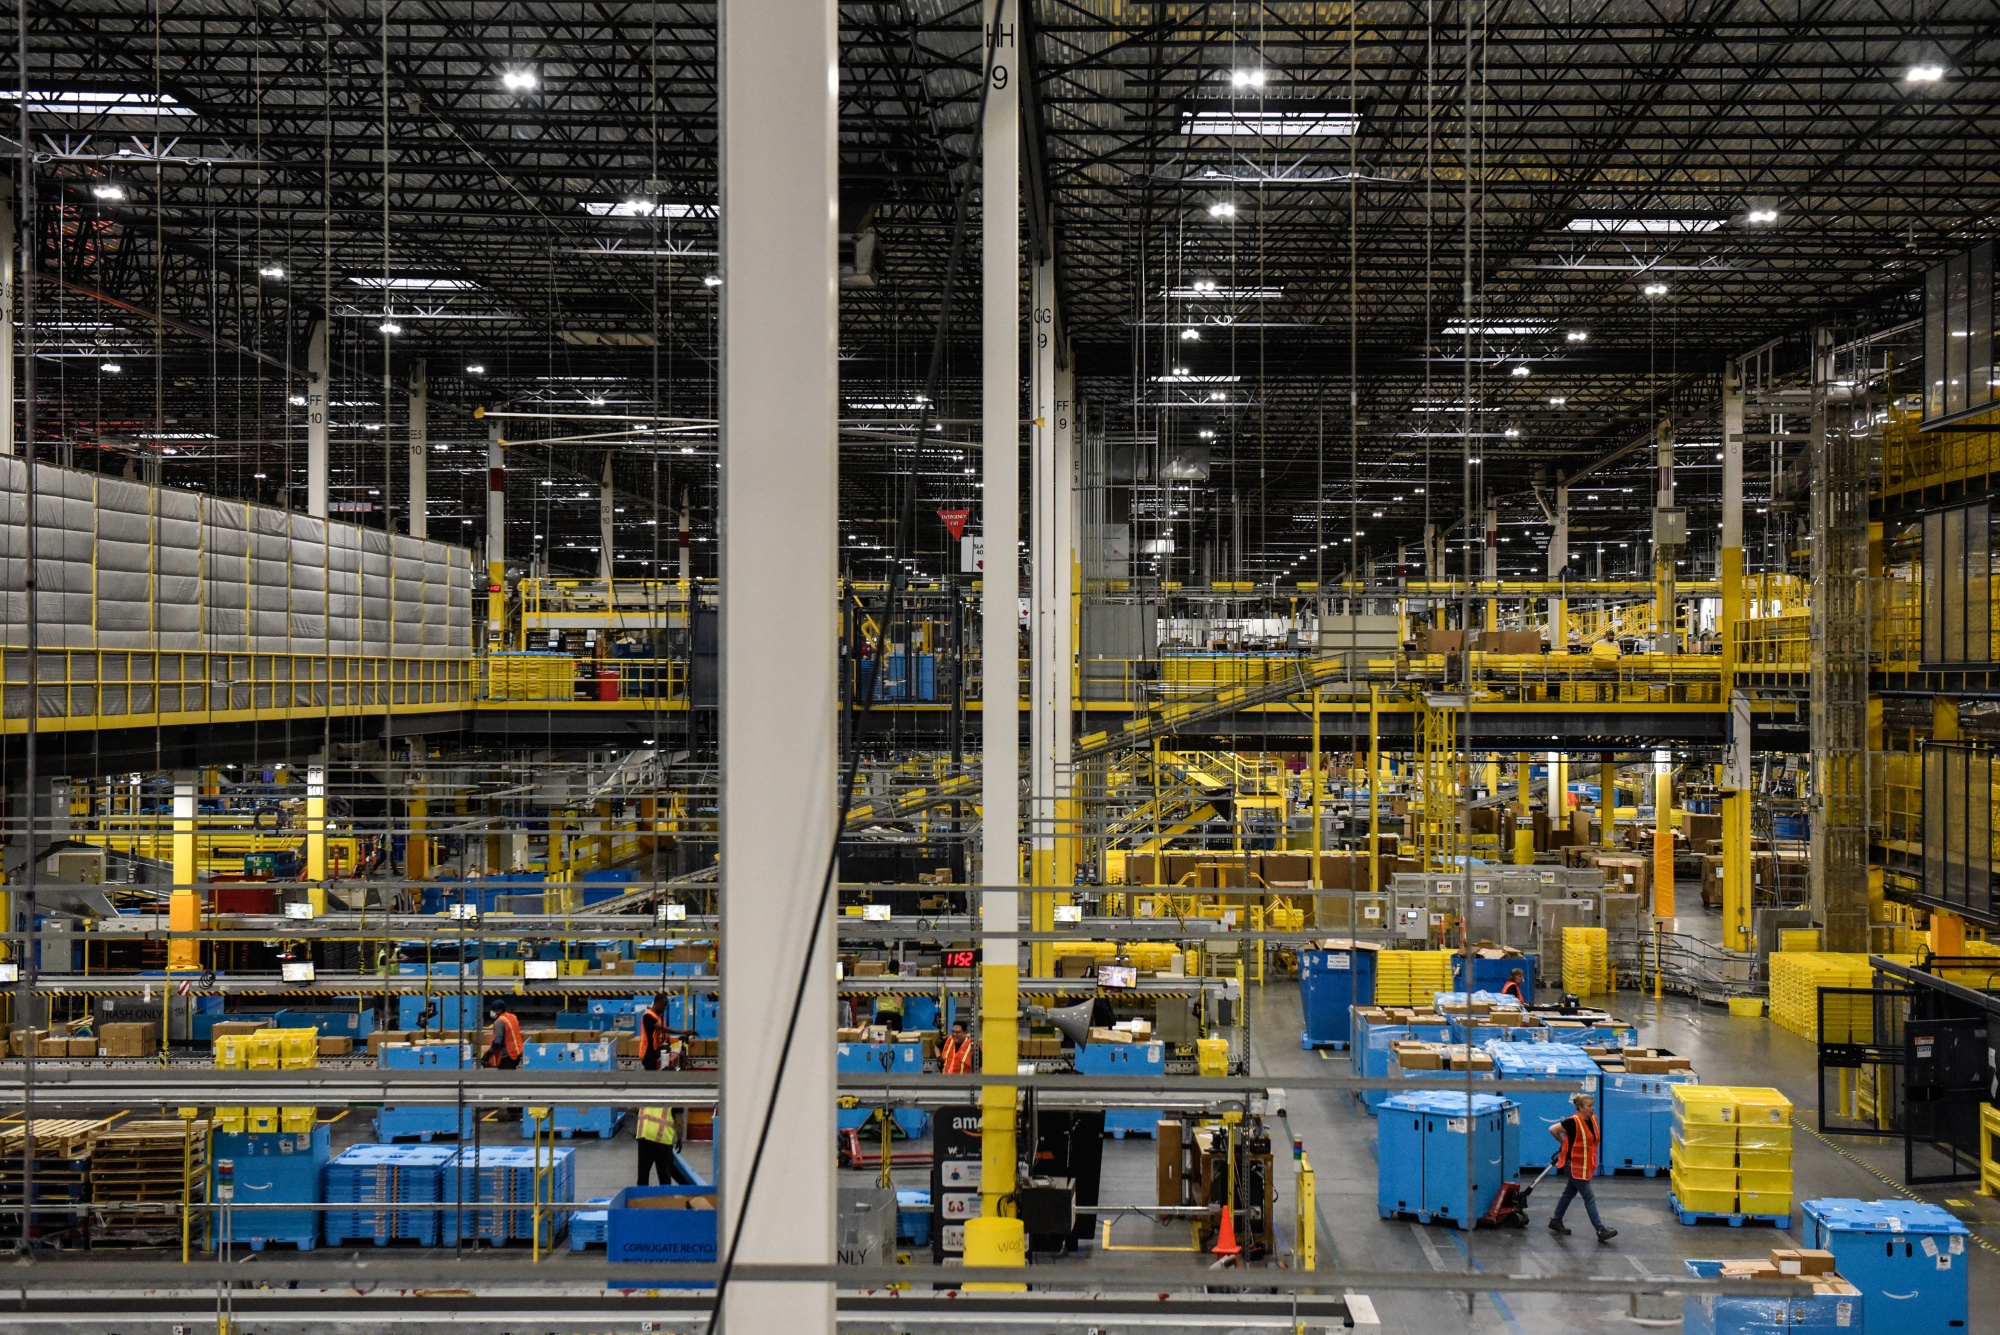 Employees prepare packages for shipping at an Amazon Fulfillment center.